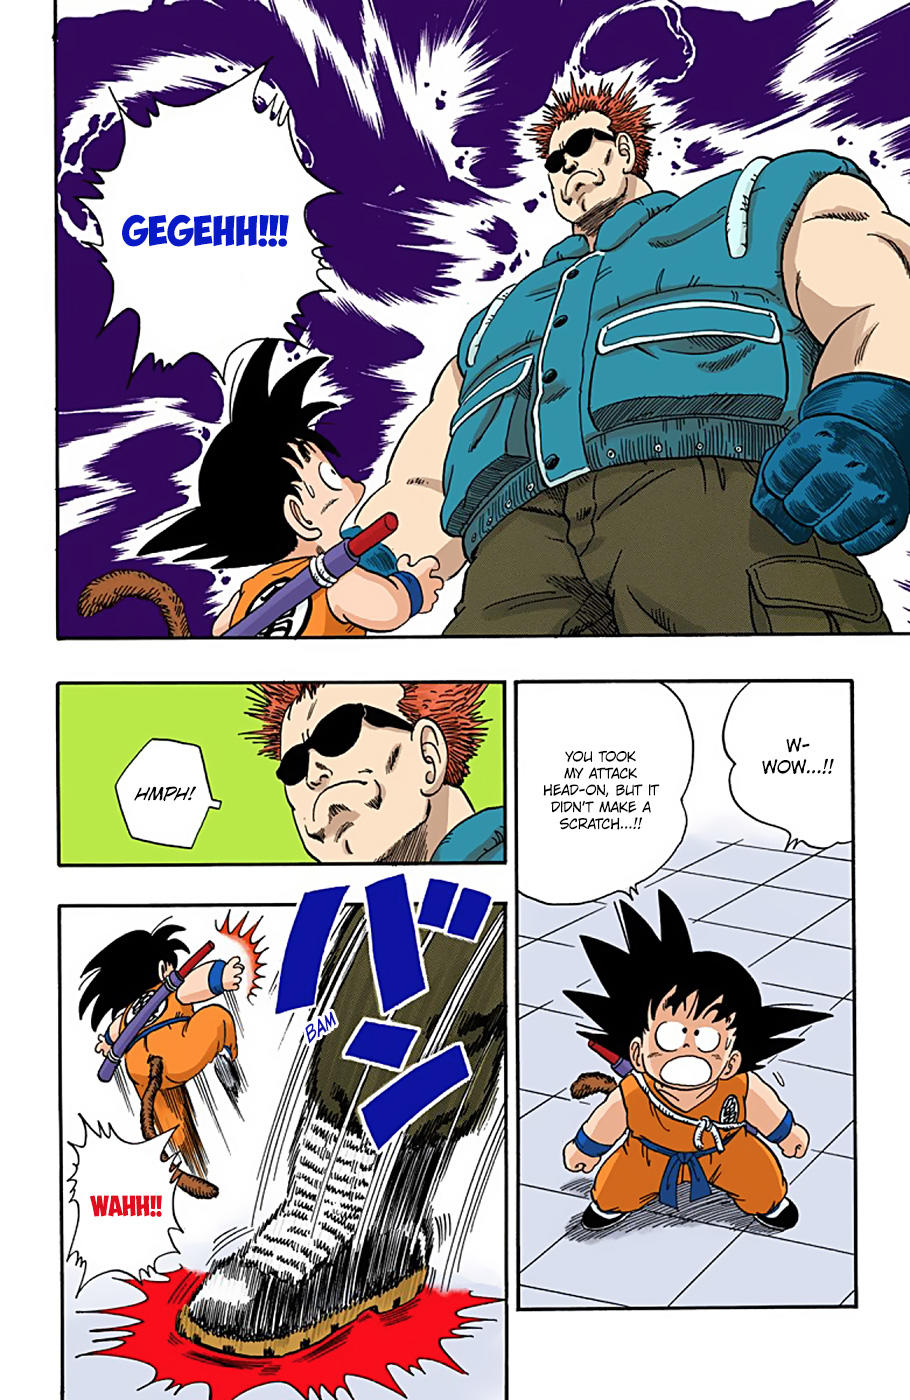 Dragon Ball - Full Color Edition Vol.5 Chapter 59: The Demon On The Third Floor!! page 2 - Mangakakalot